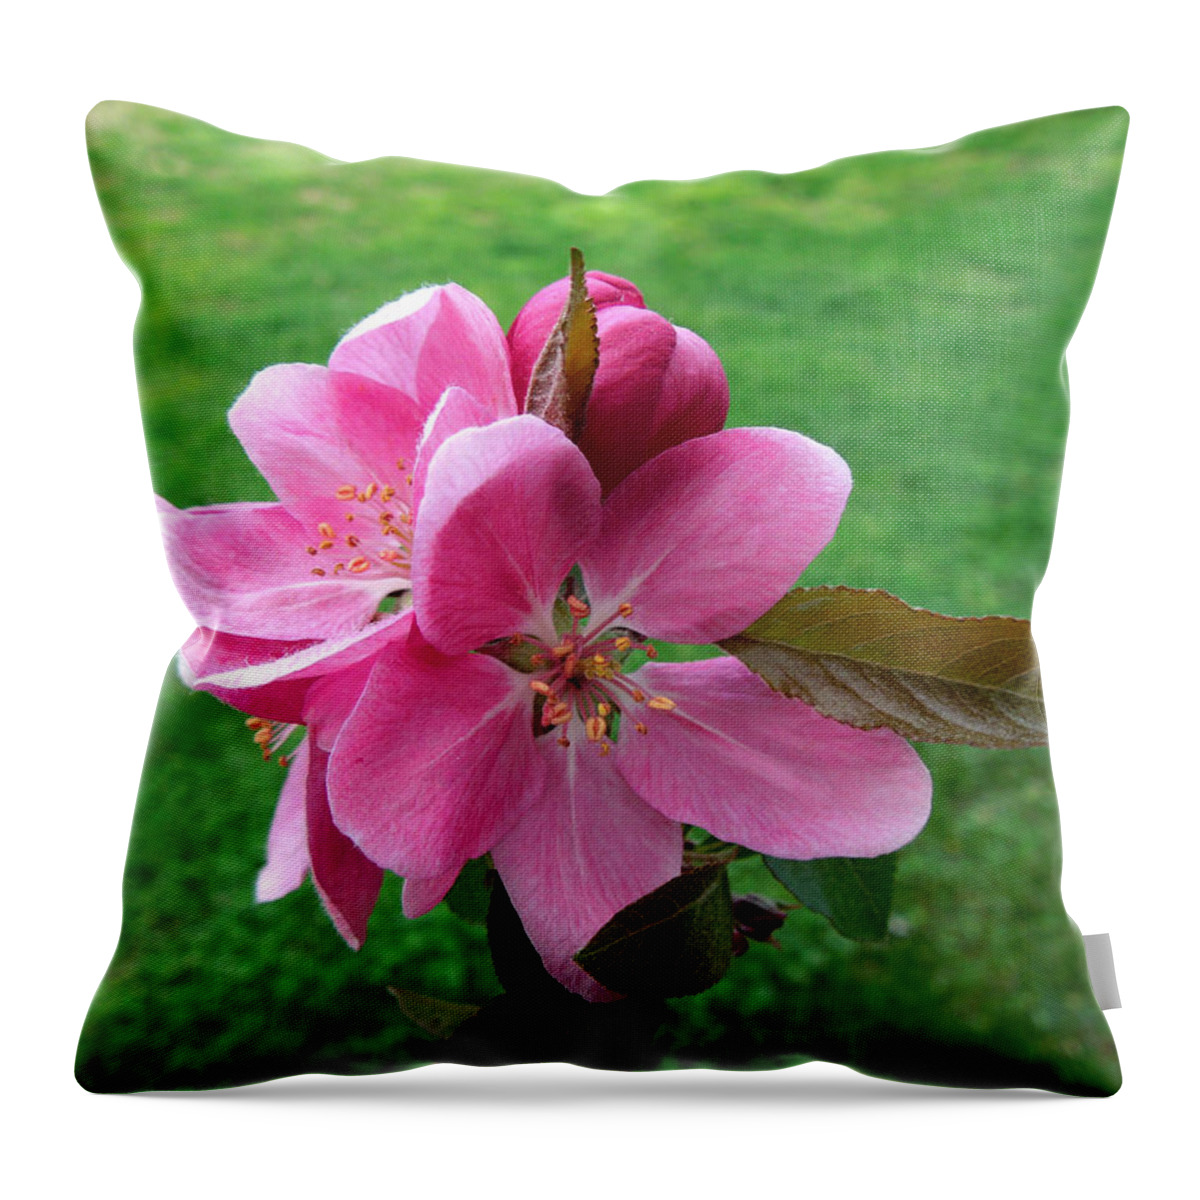 Crabapple Throw Pillow featuring the photograph Crabapple Portrait by Pete Trenholm